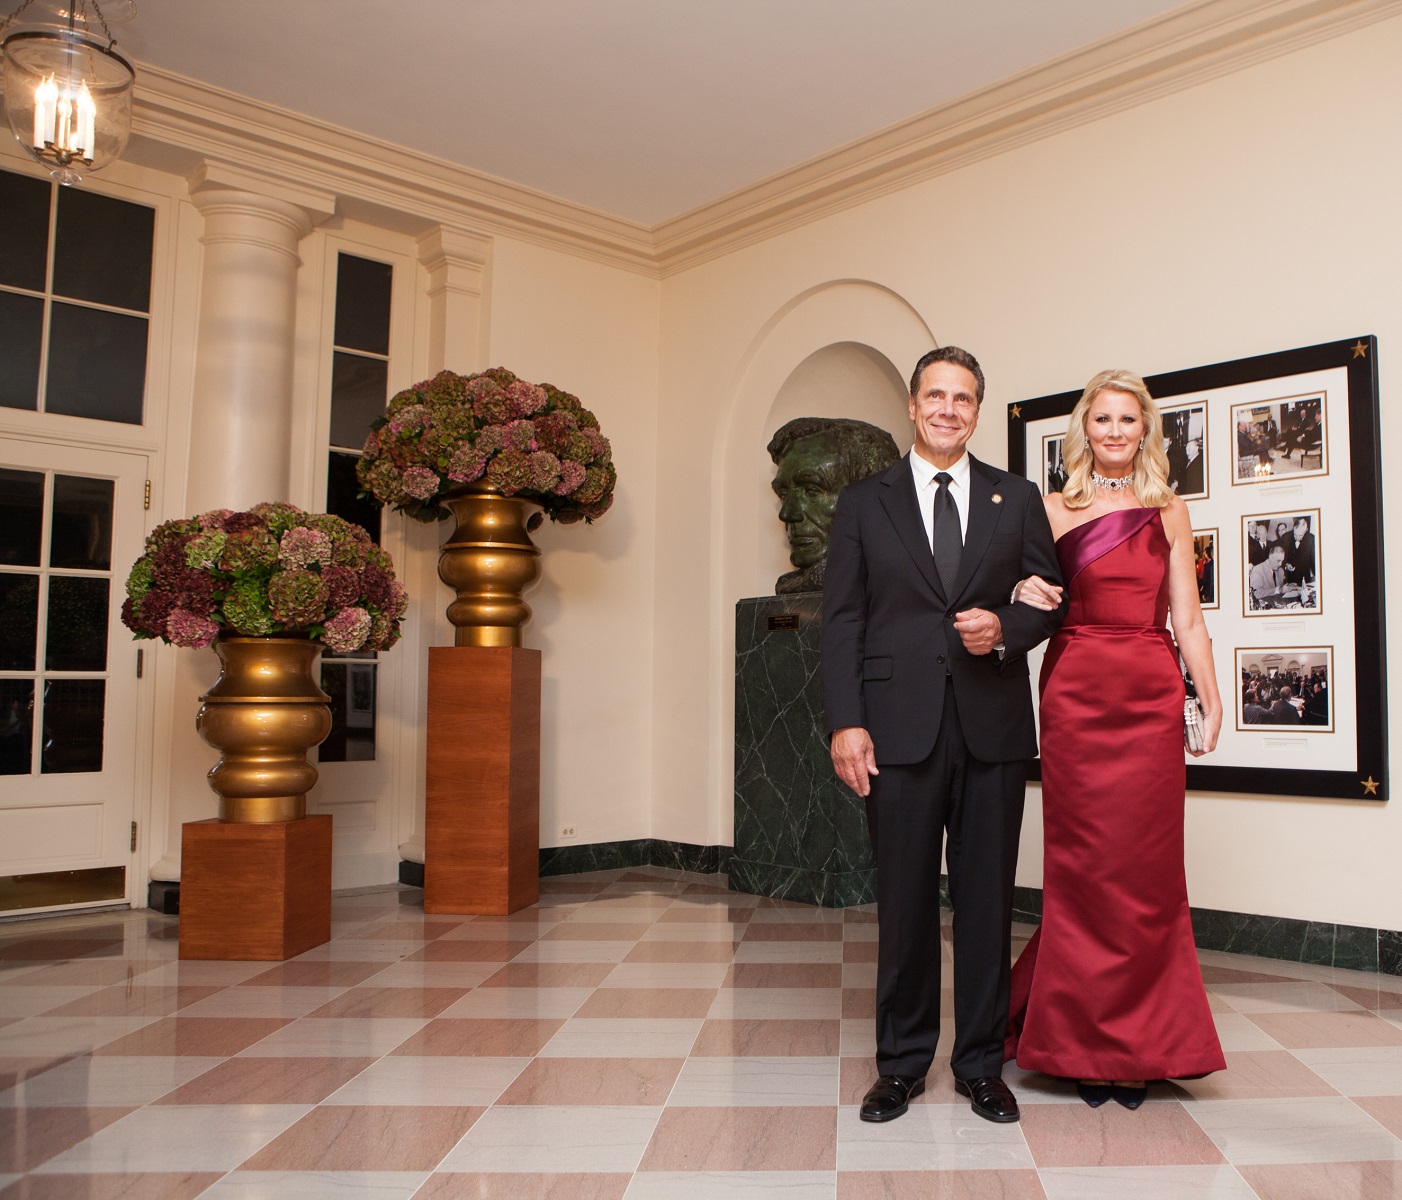 Andrew Cuomo and Sandra Lee, arrive at the White House in Washington, DC, USA on 18 October 2016